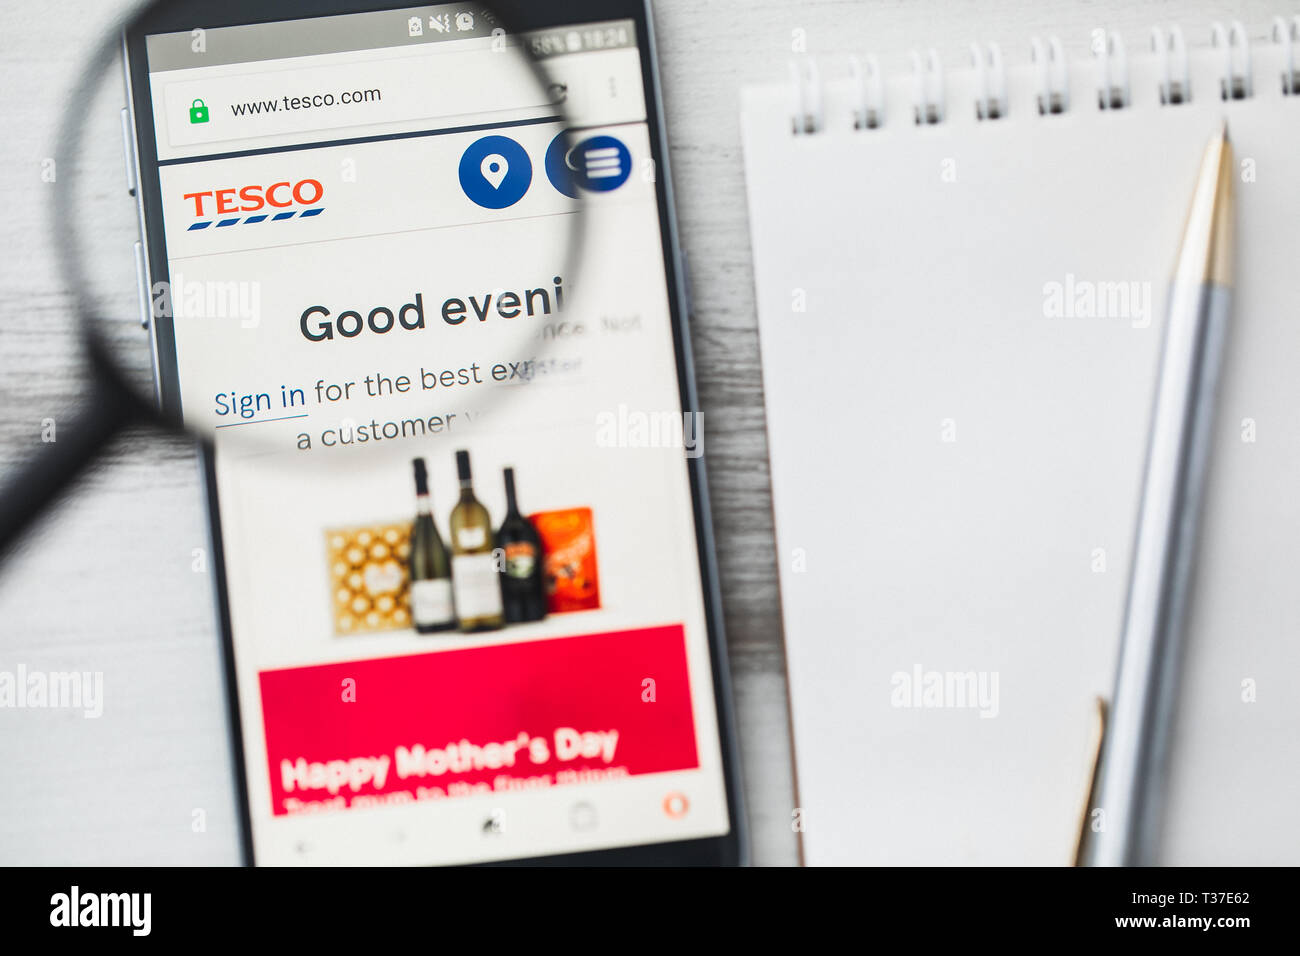 Los Angeles, California, USA - 3 April 2019: Tesco plc official website homepage under magnifying glass. Concept Tesco Retailing company logo visible Stock Photo